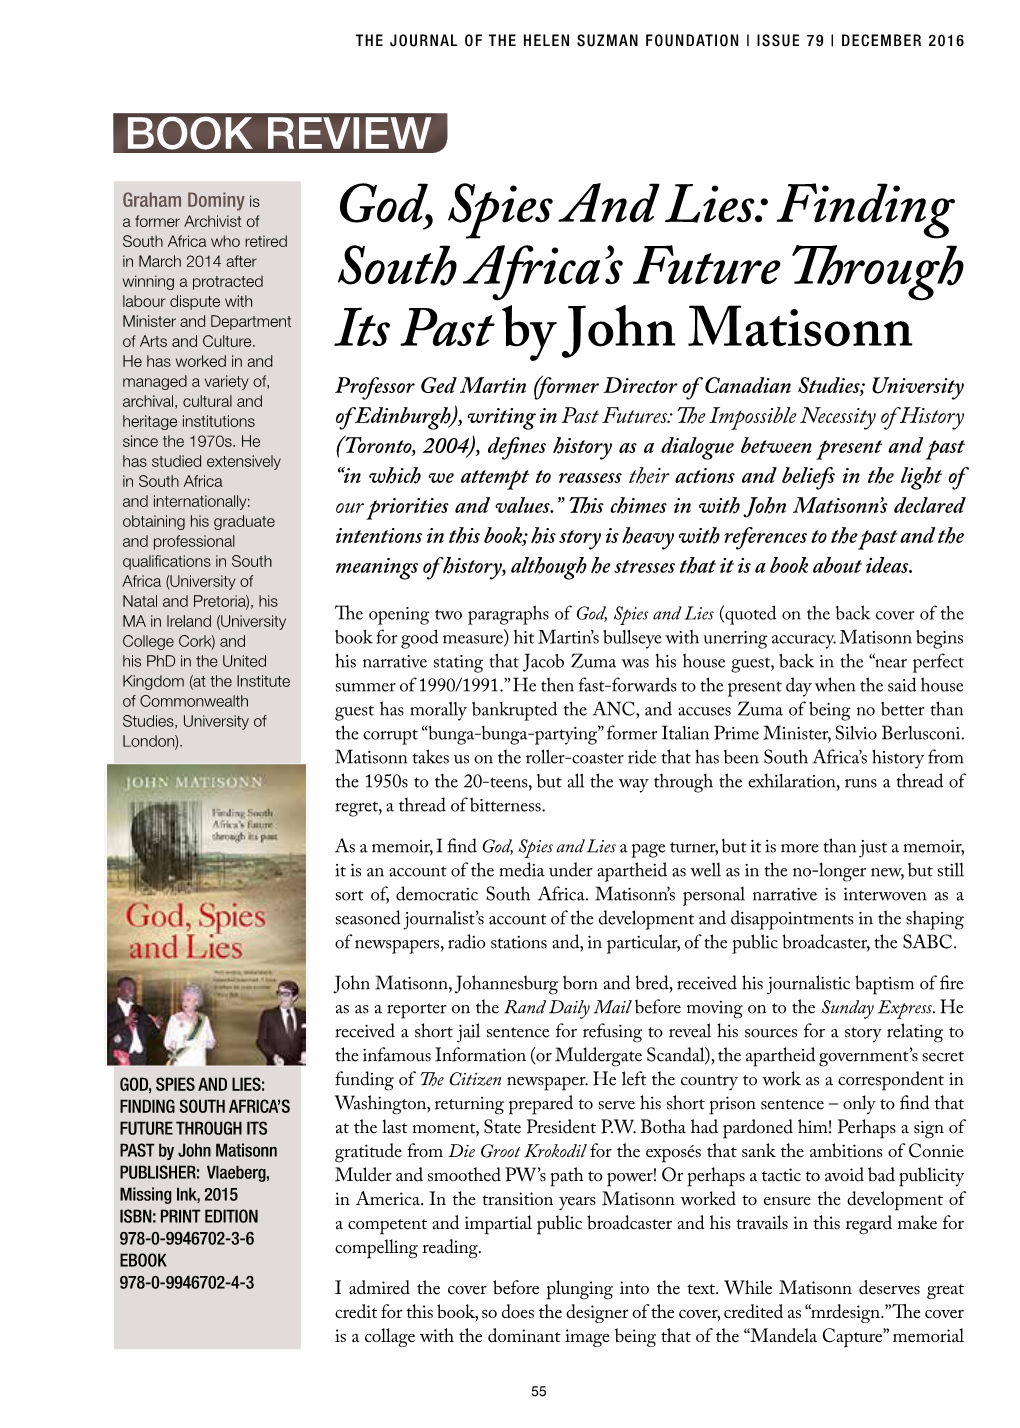 God, Spies and Lies: Finding South Africa's Future Through Its Past By